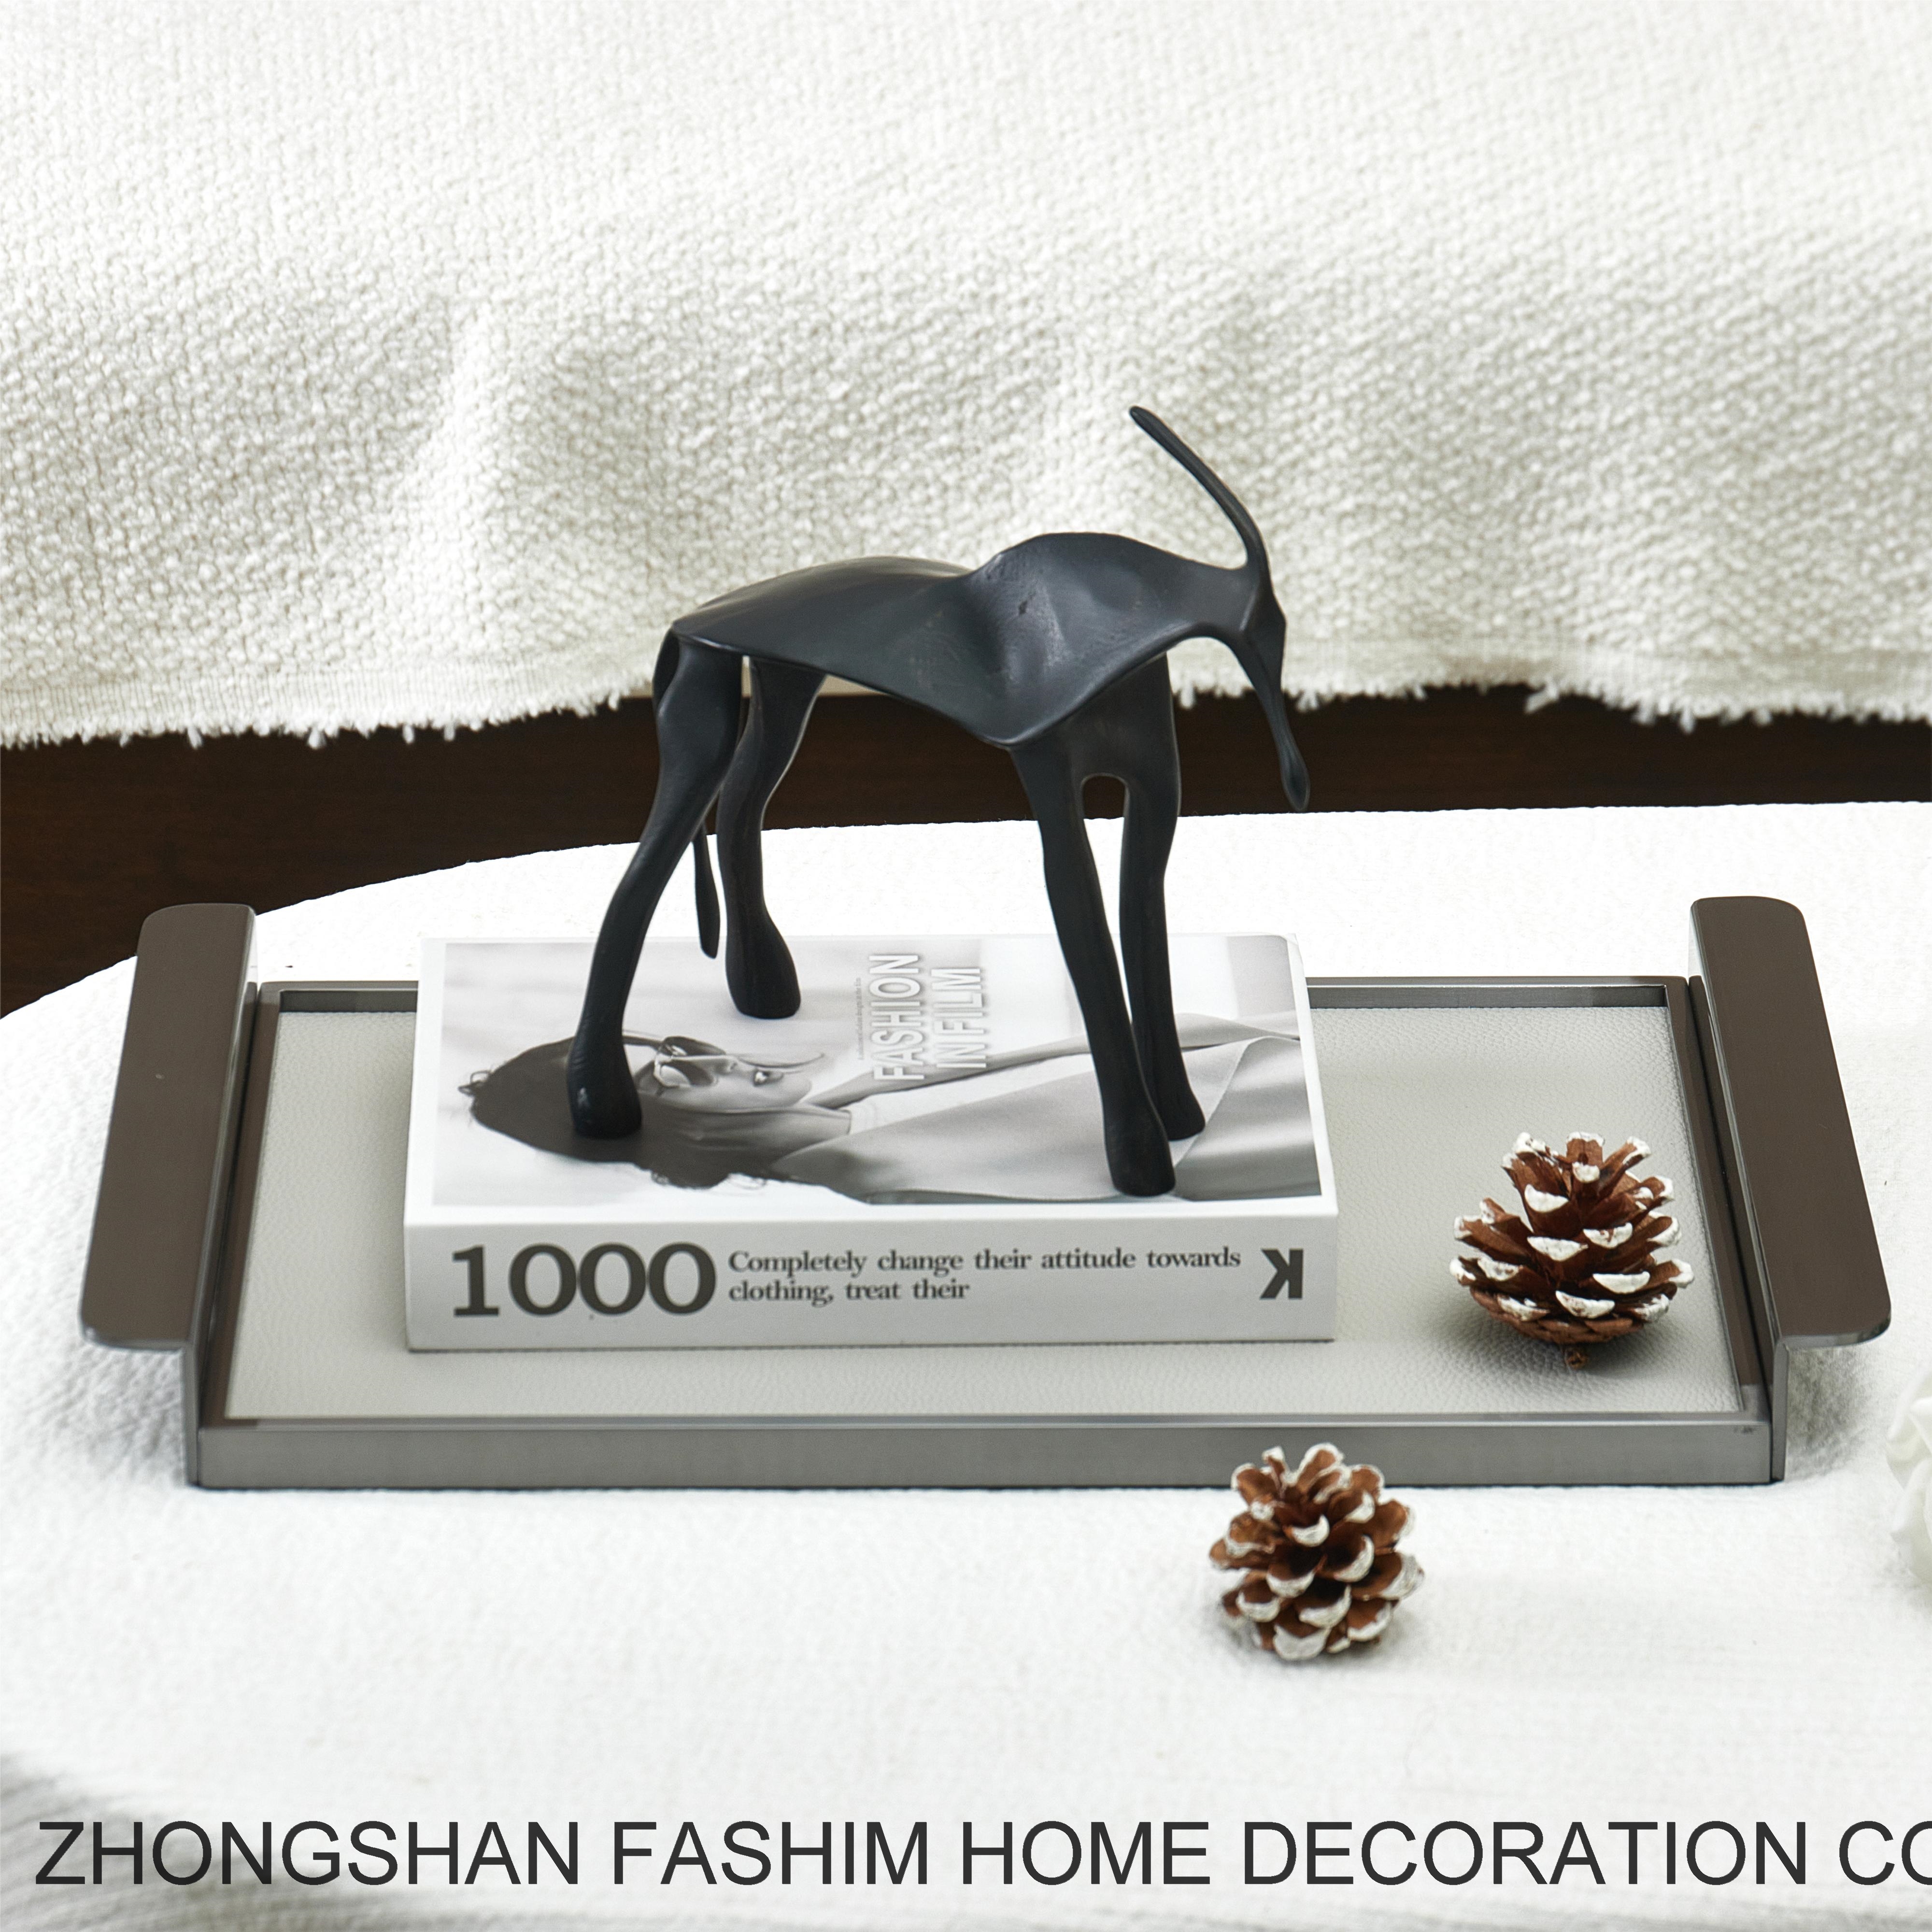 Fashimdecor Stainless steel home decoration tray